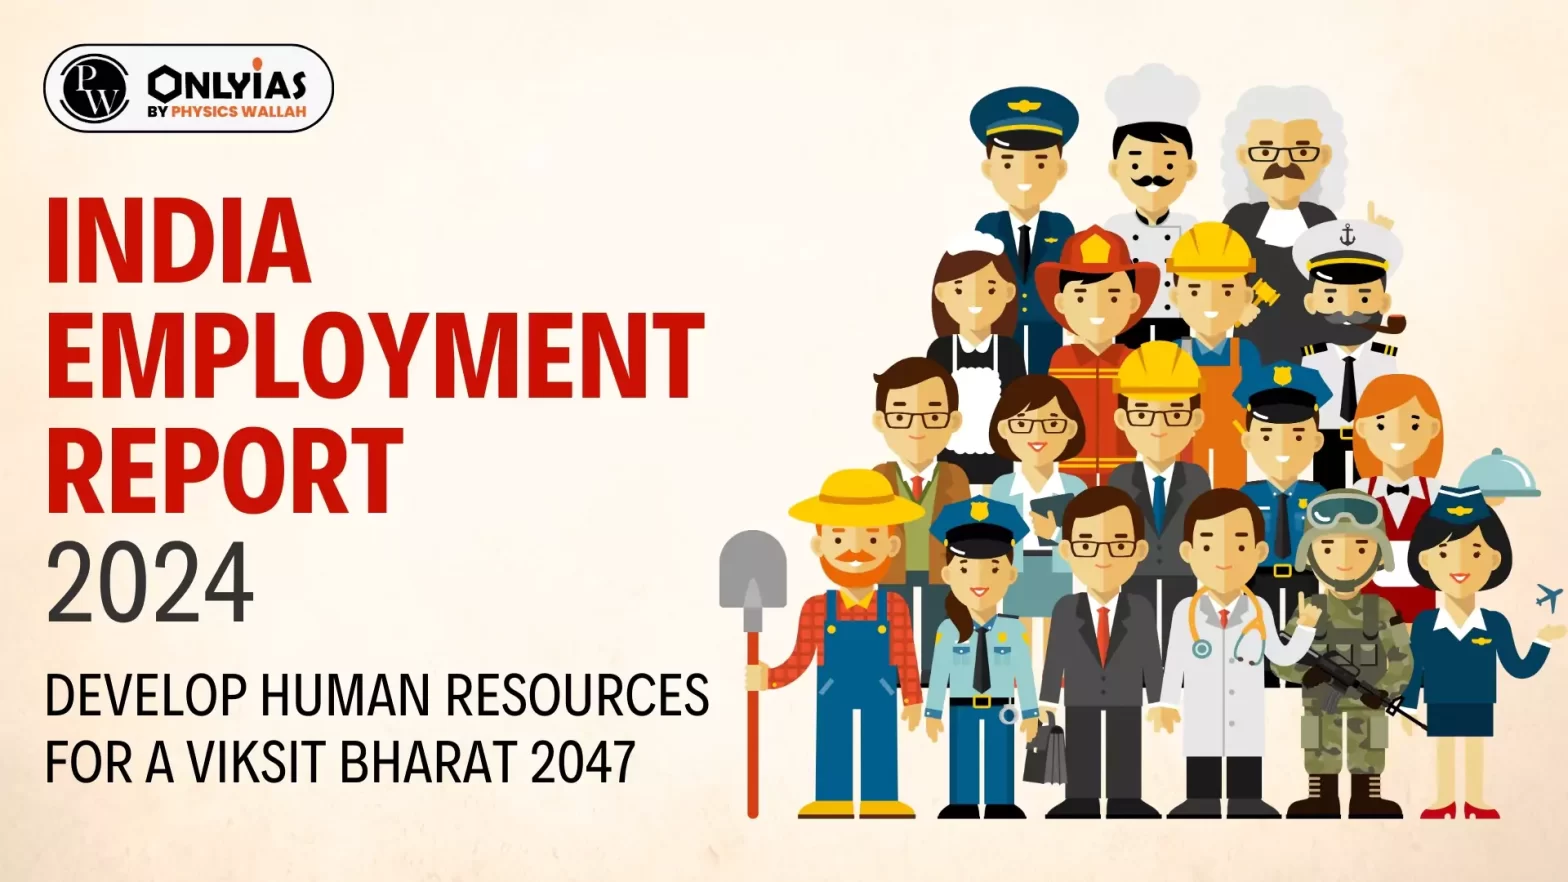 India Employment Report 2024: Develop Human Resources for a Viksit Bharat 2047